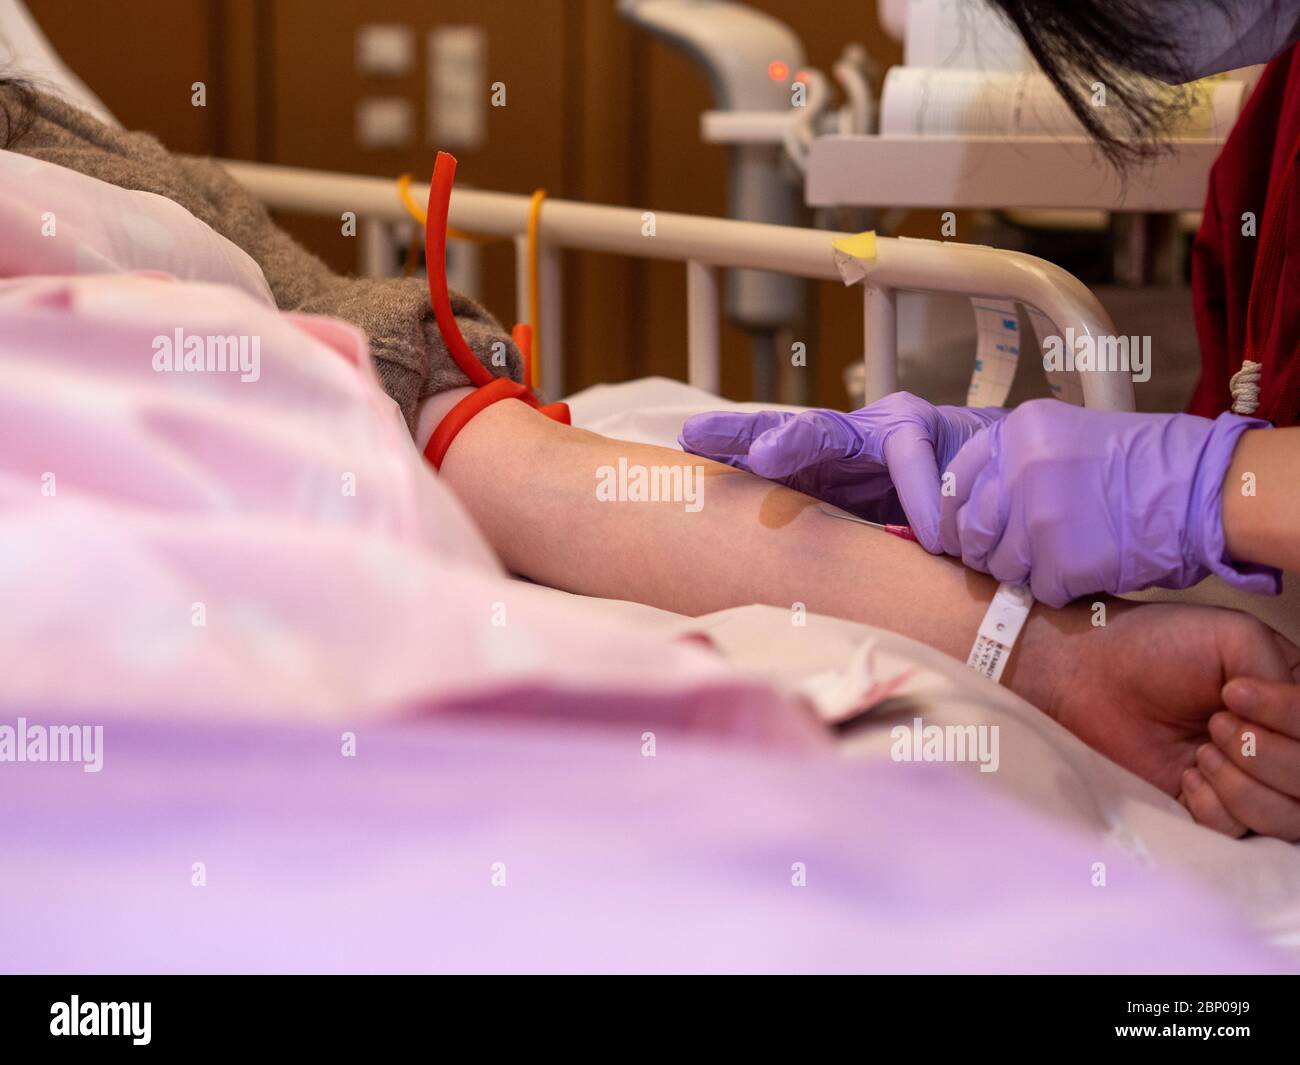 A nurse inserting a canula into a patient's arm Stock Photo